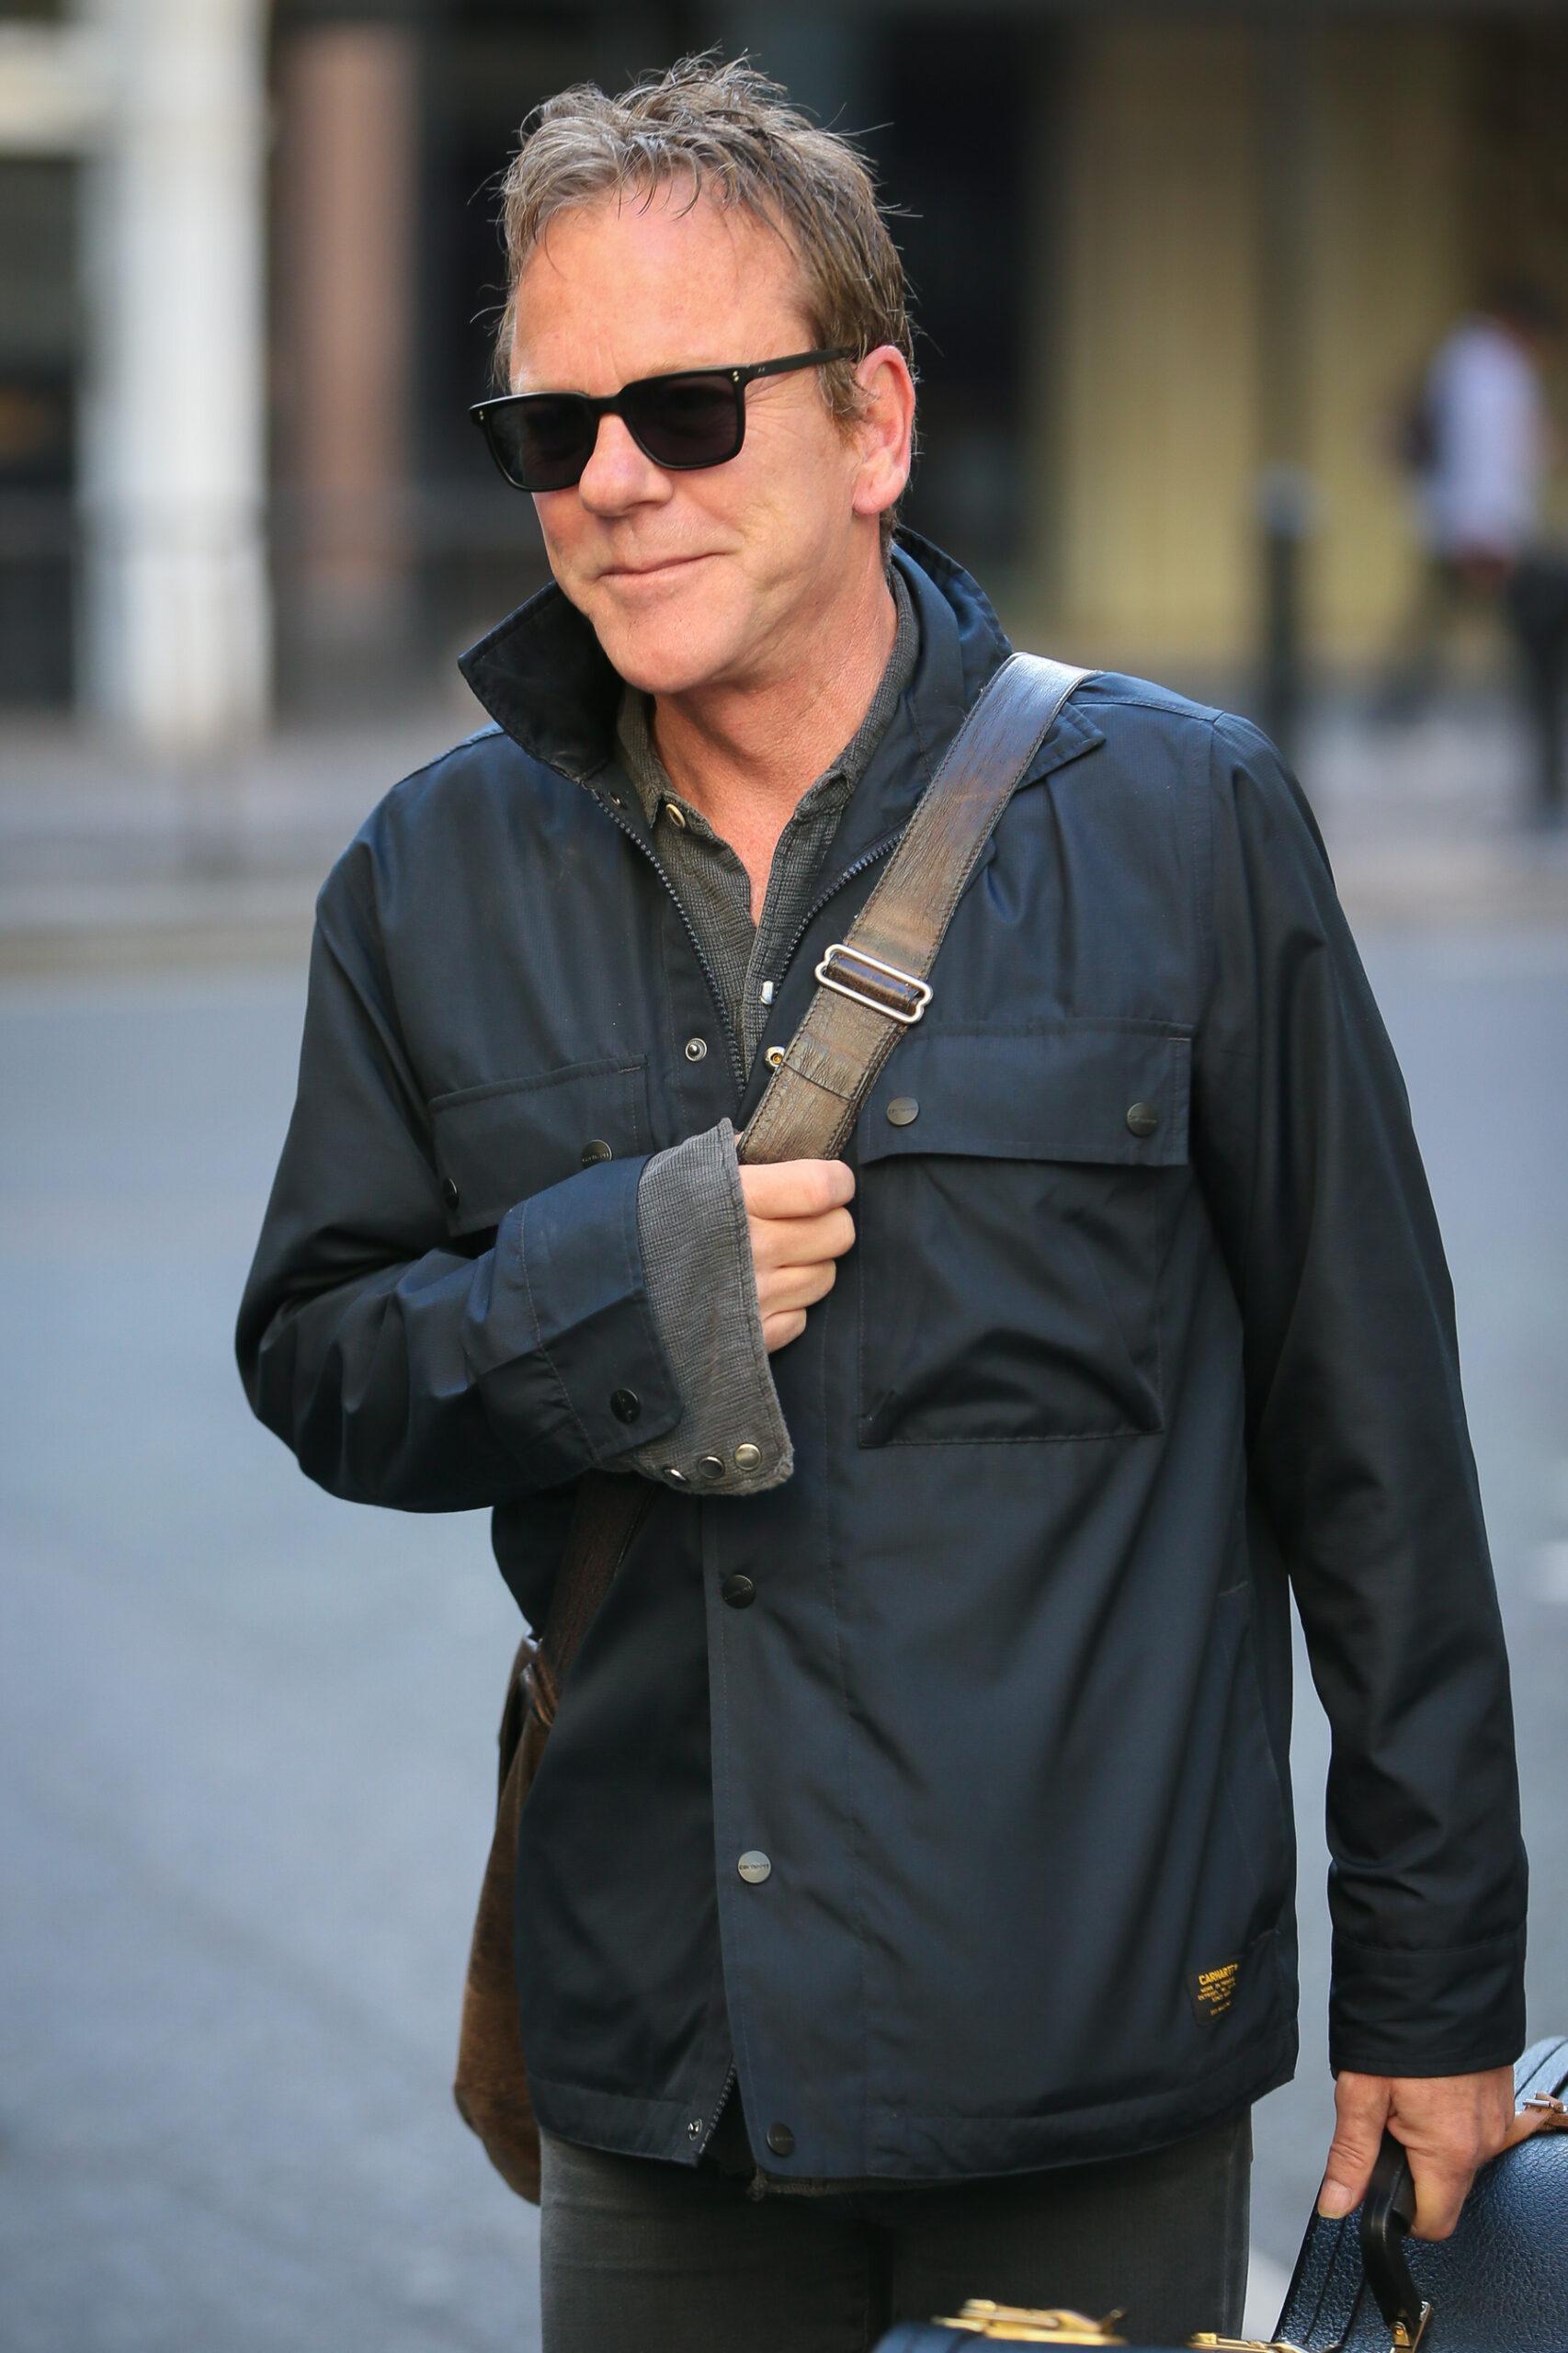 Kiefer Sutherland visiting BBC Radio Two Studios to promote his new album Reckless & Me - London